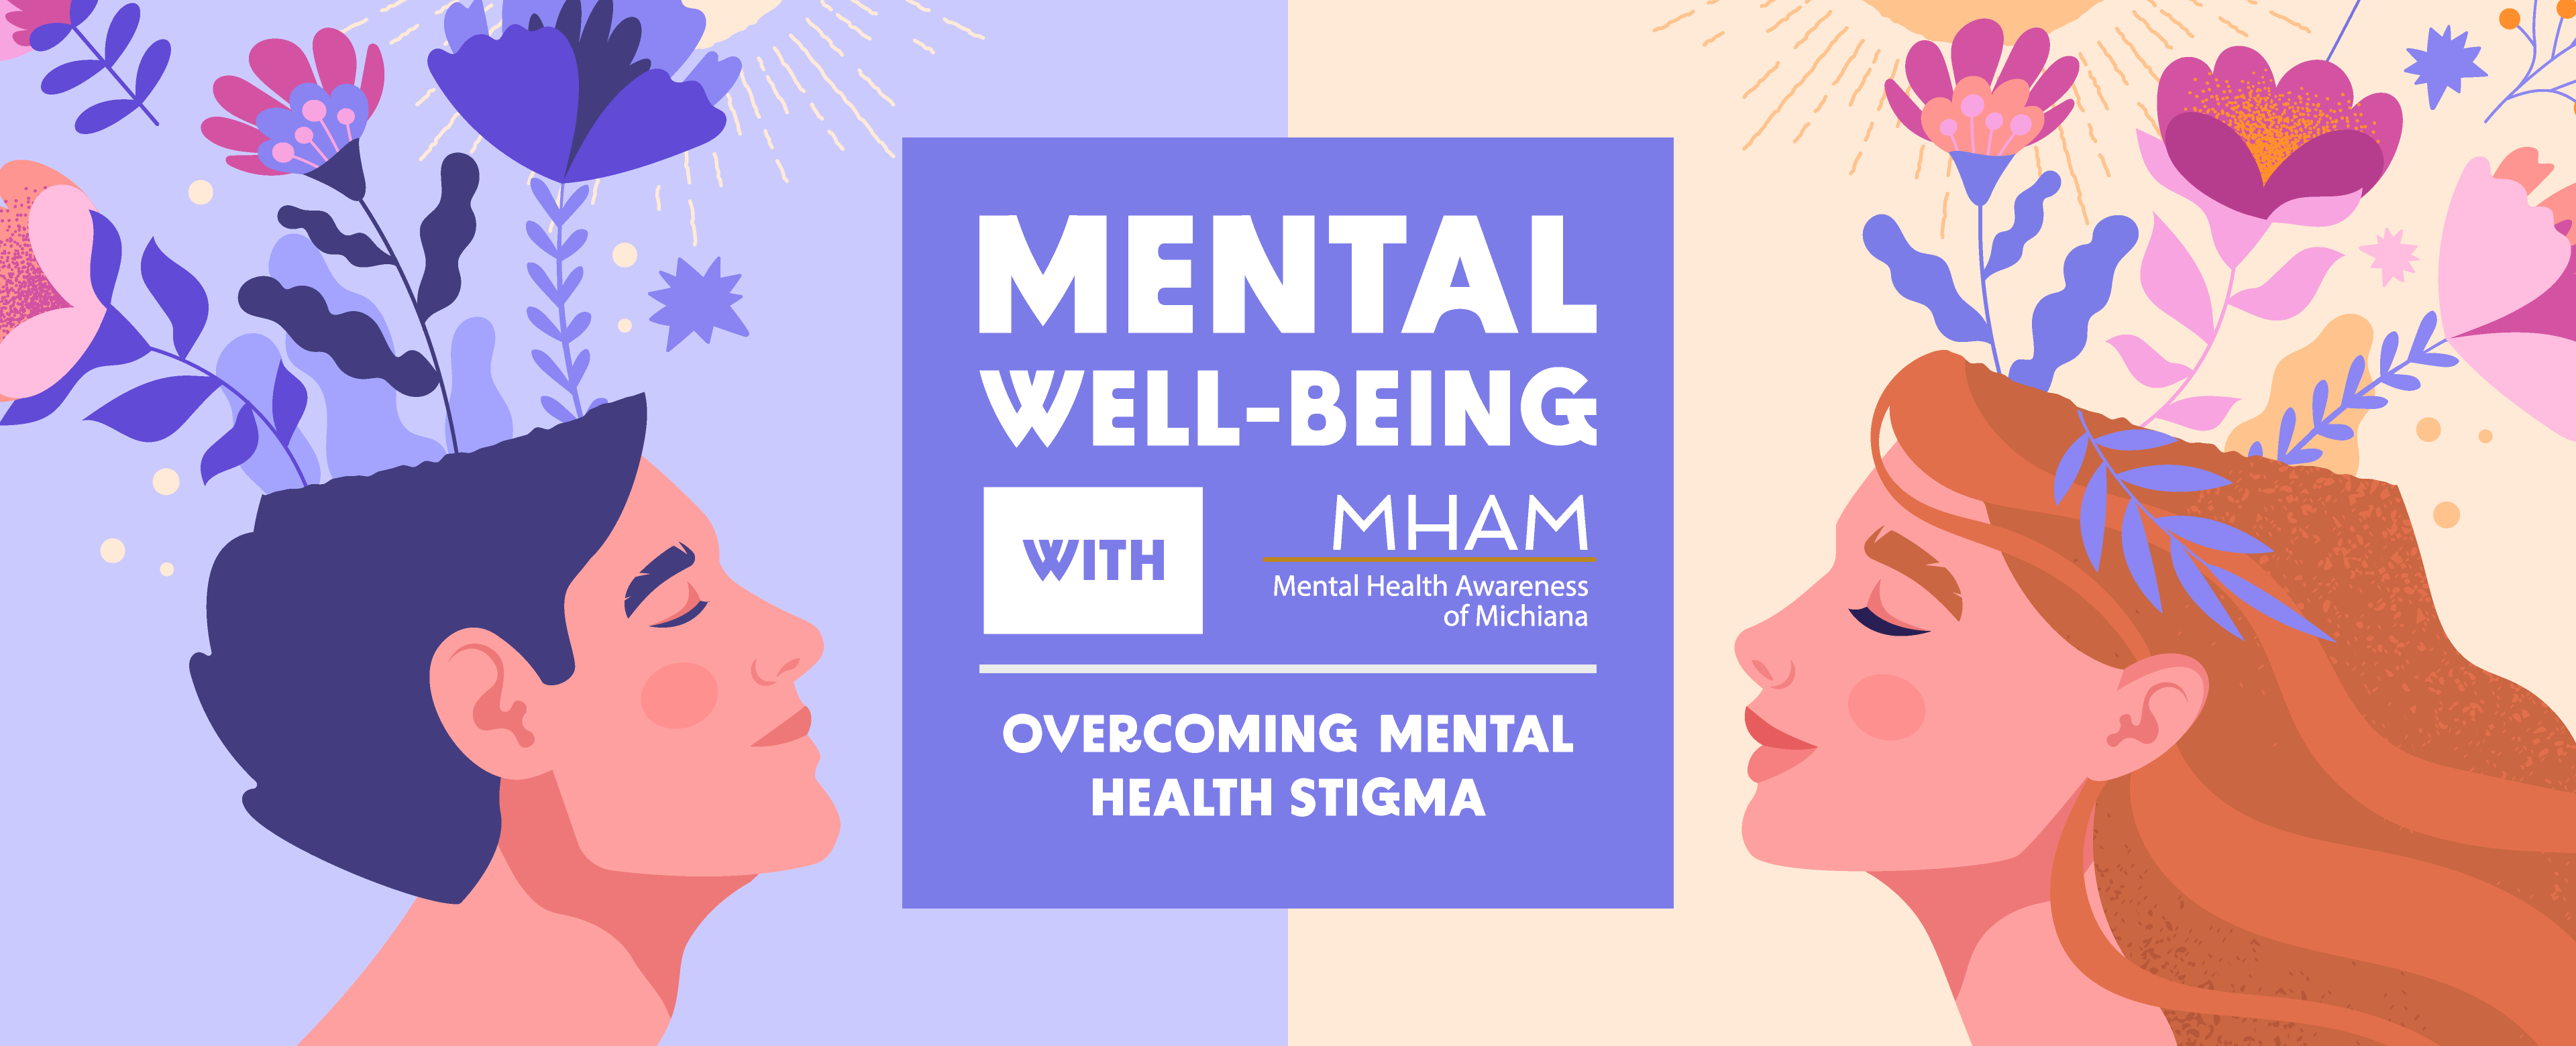 Mental Well-Being with Mental Health Awareness of Michiana: Overcoming Mental Health Stigma